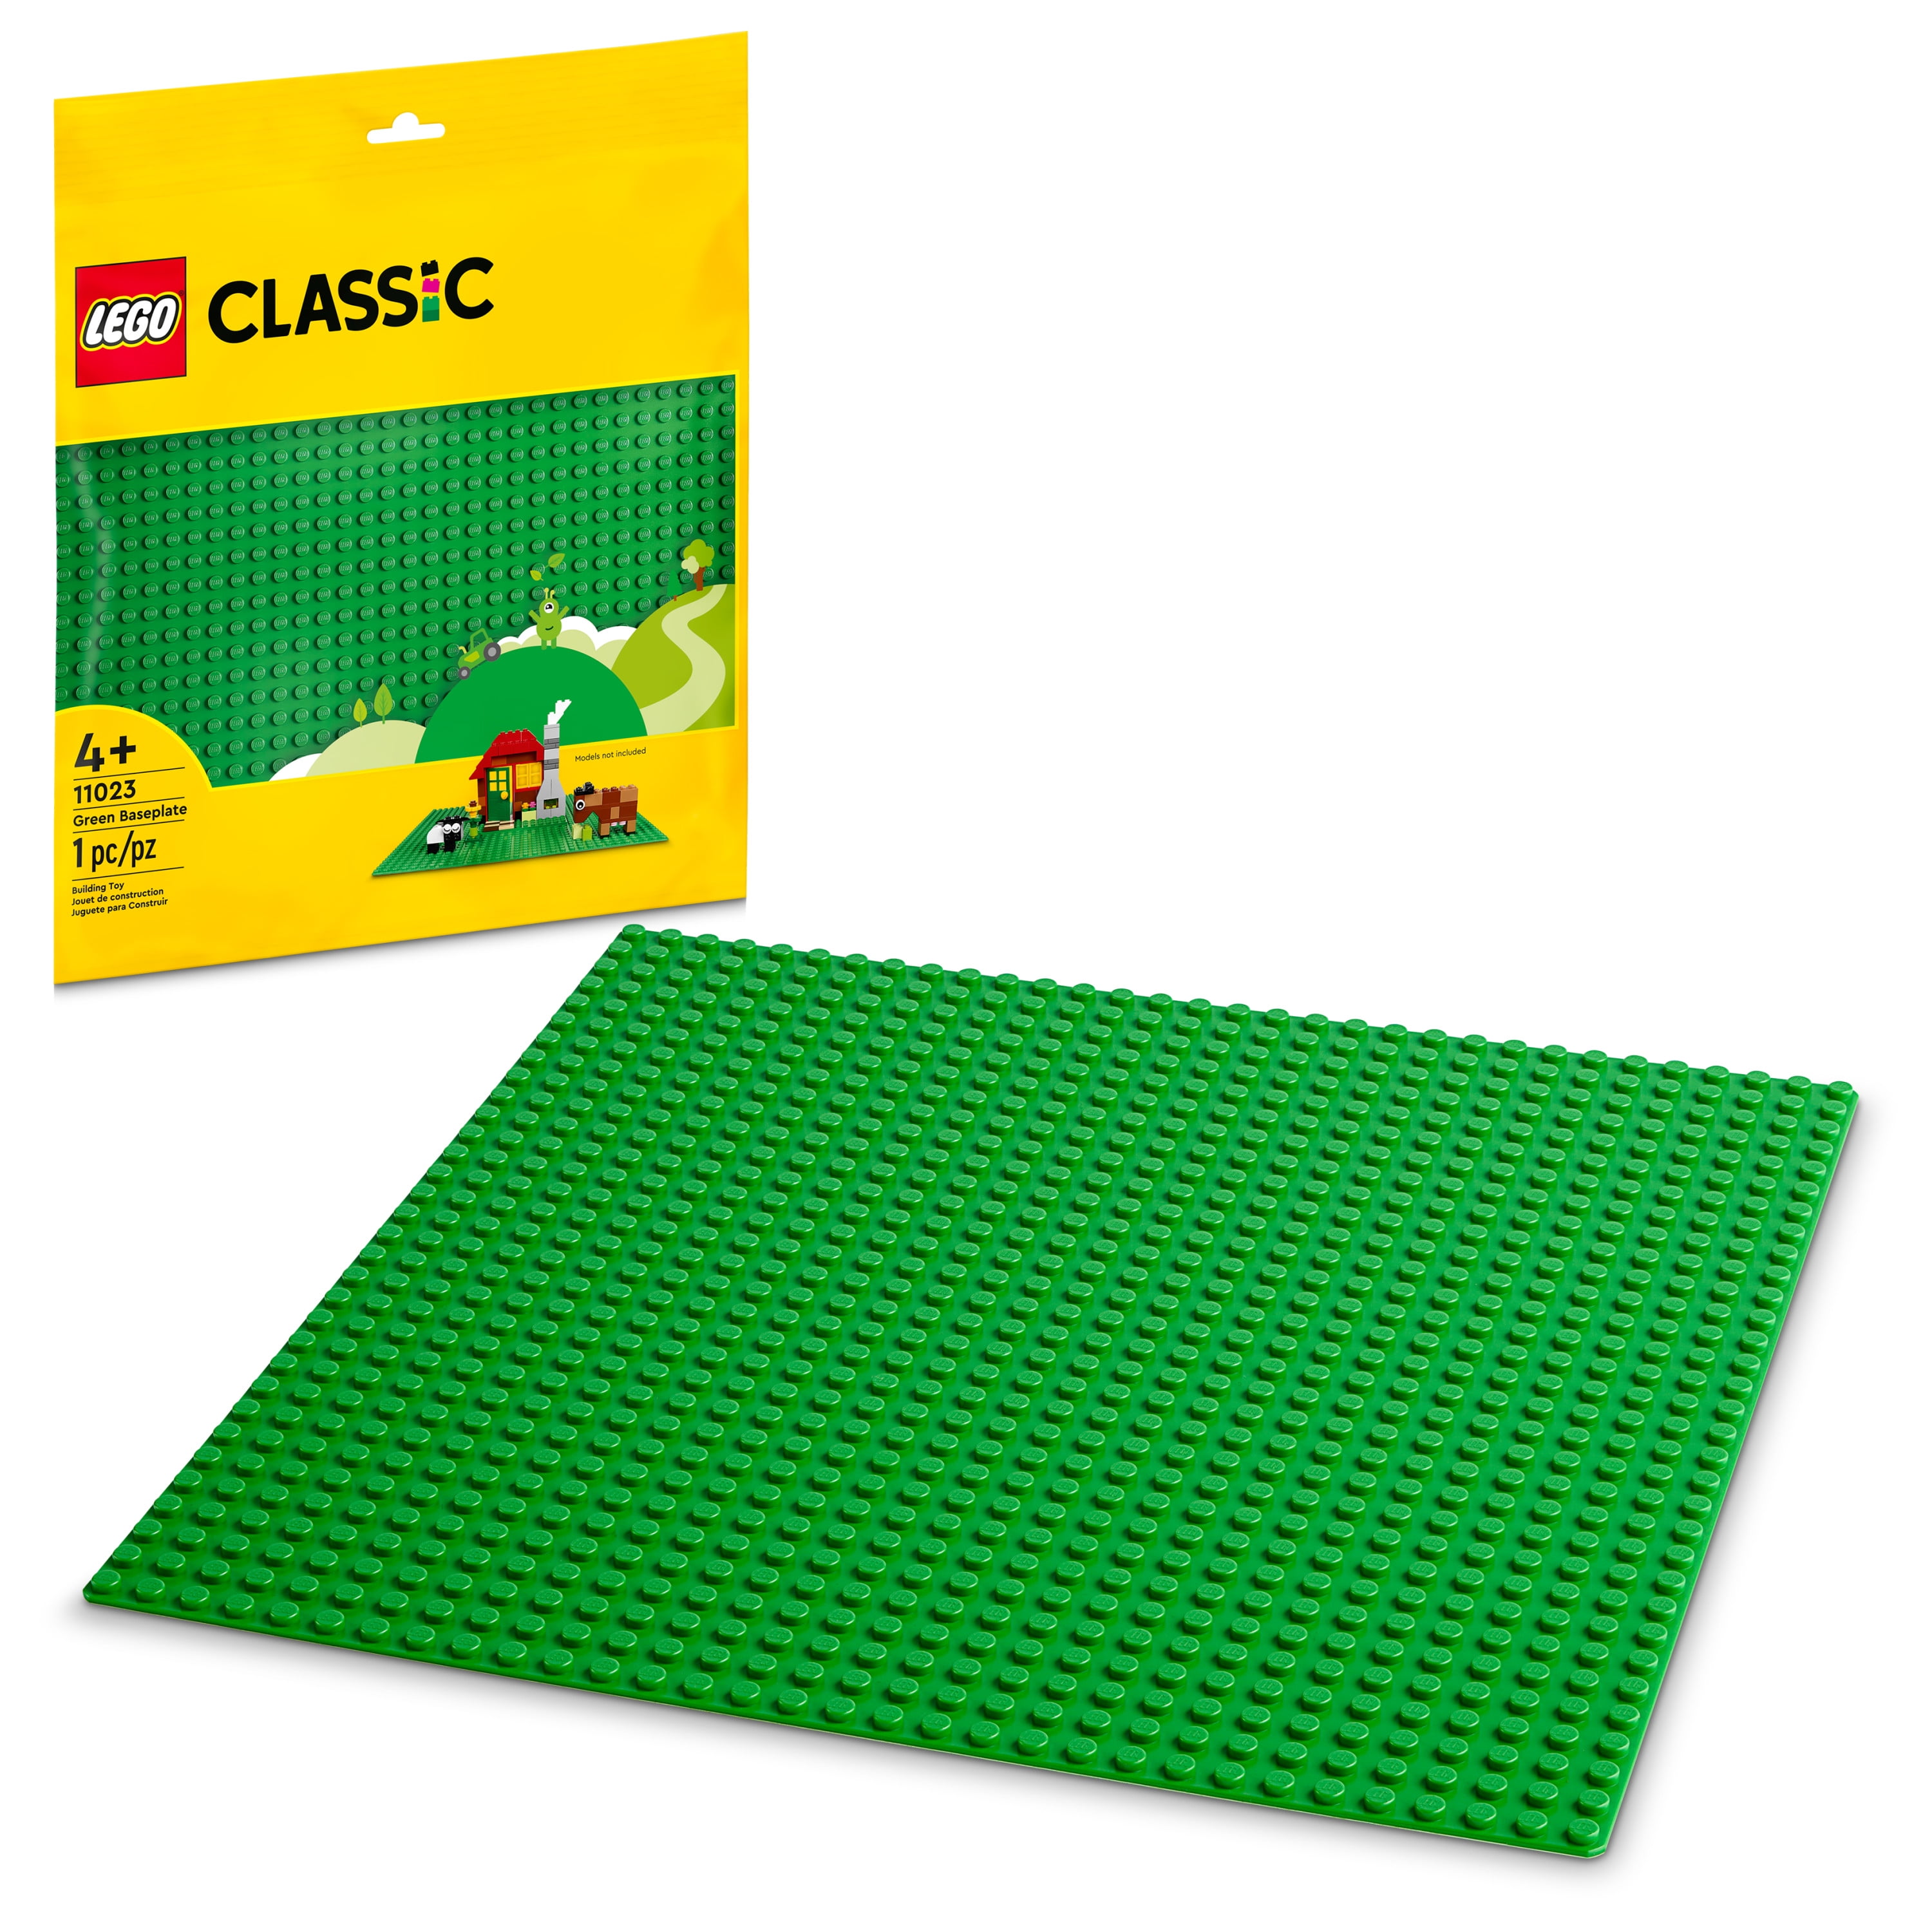 WWEI Classic Apple Green Baseplates 50 x 50 Hole Large Building Board Base Plates Toy for Kids Compatible with Lego 